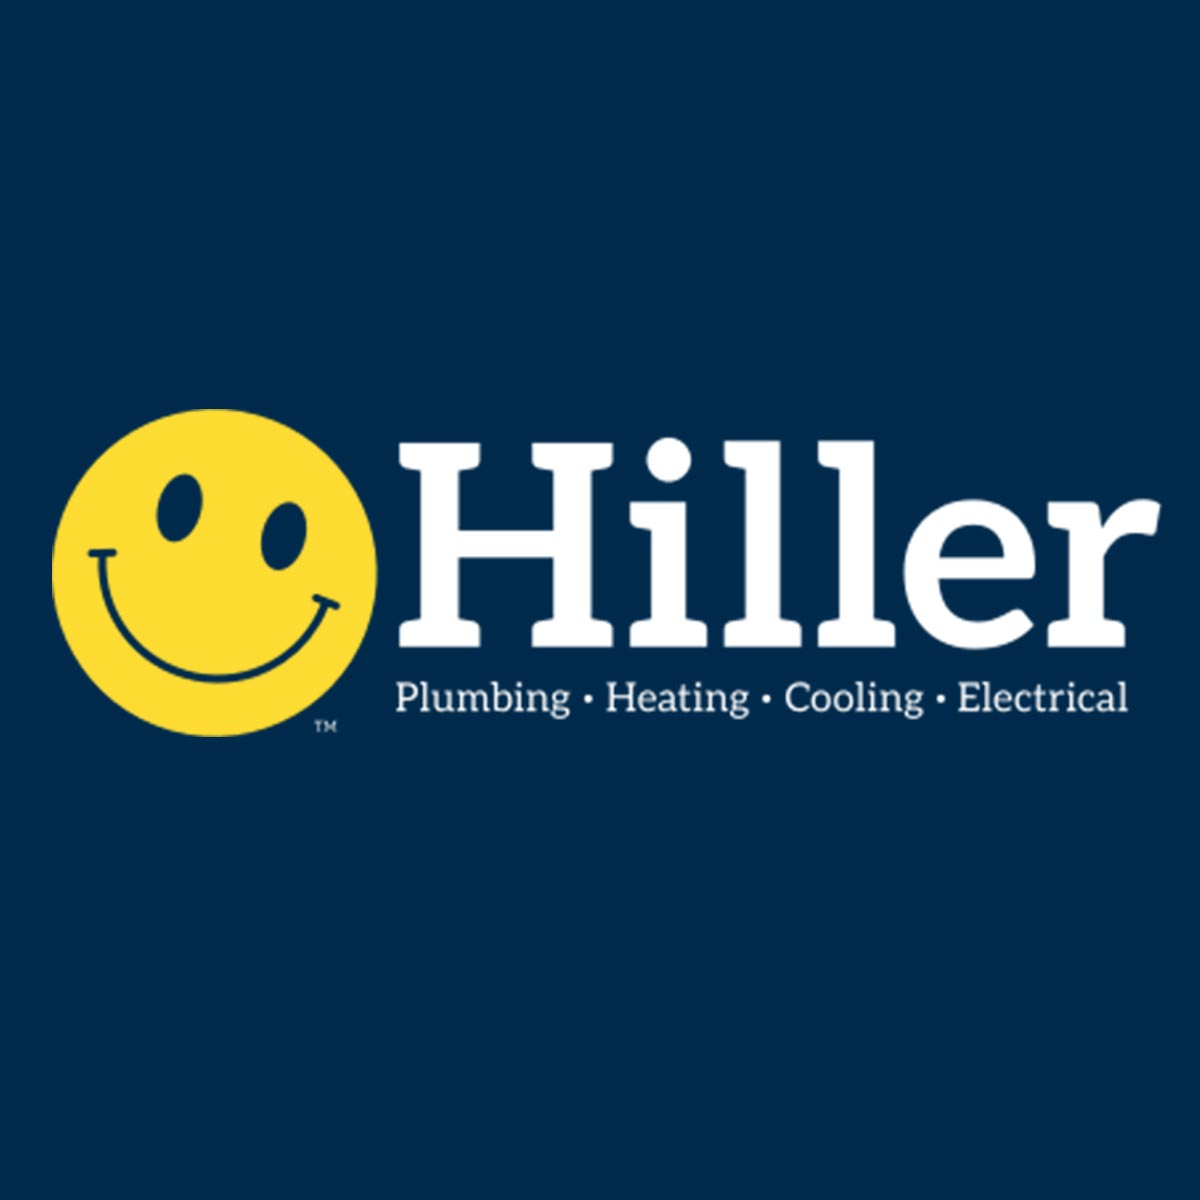 15 Common Causes and Tips of a Clogged Drain - Happy Hiller